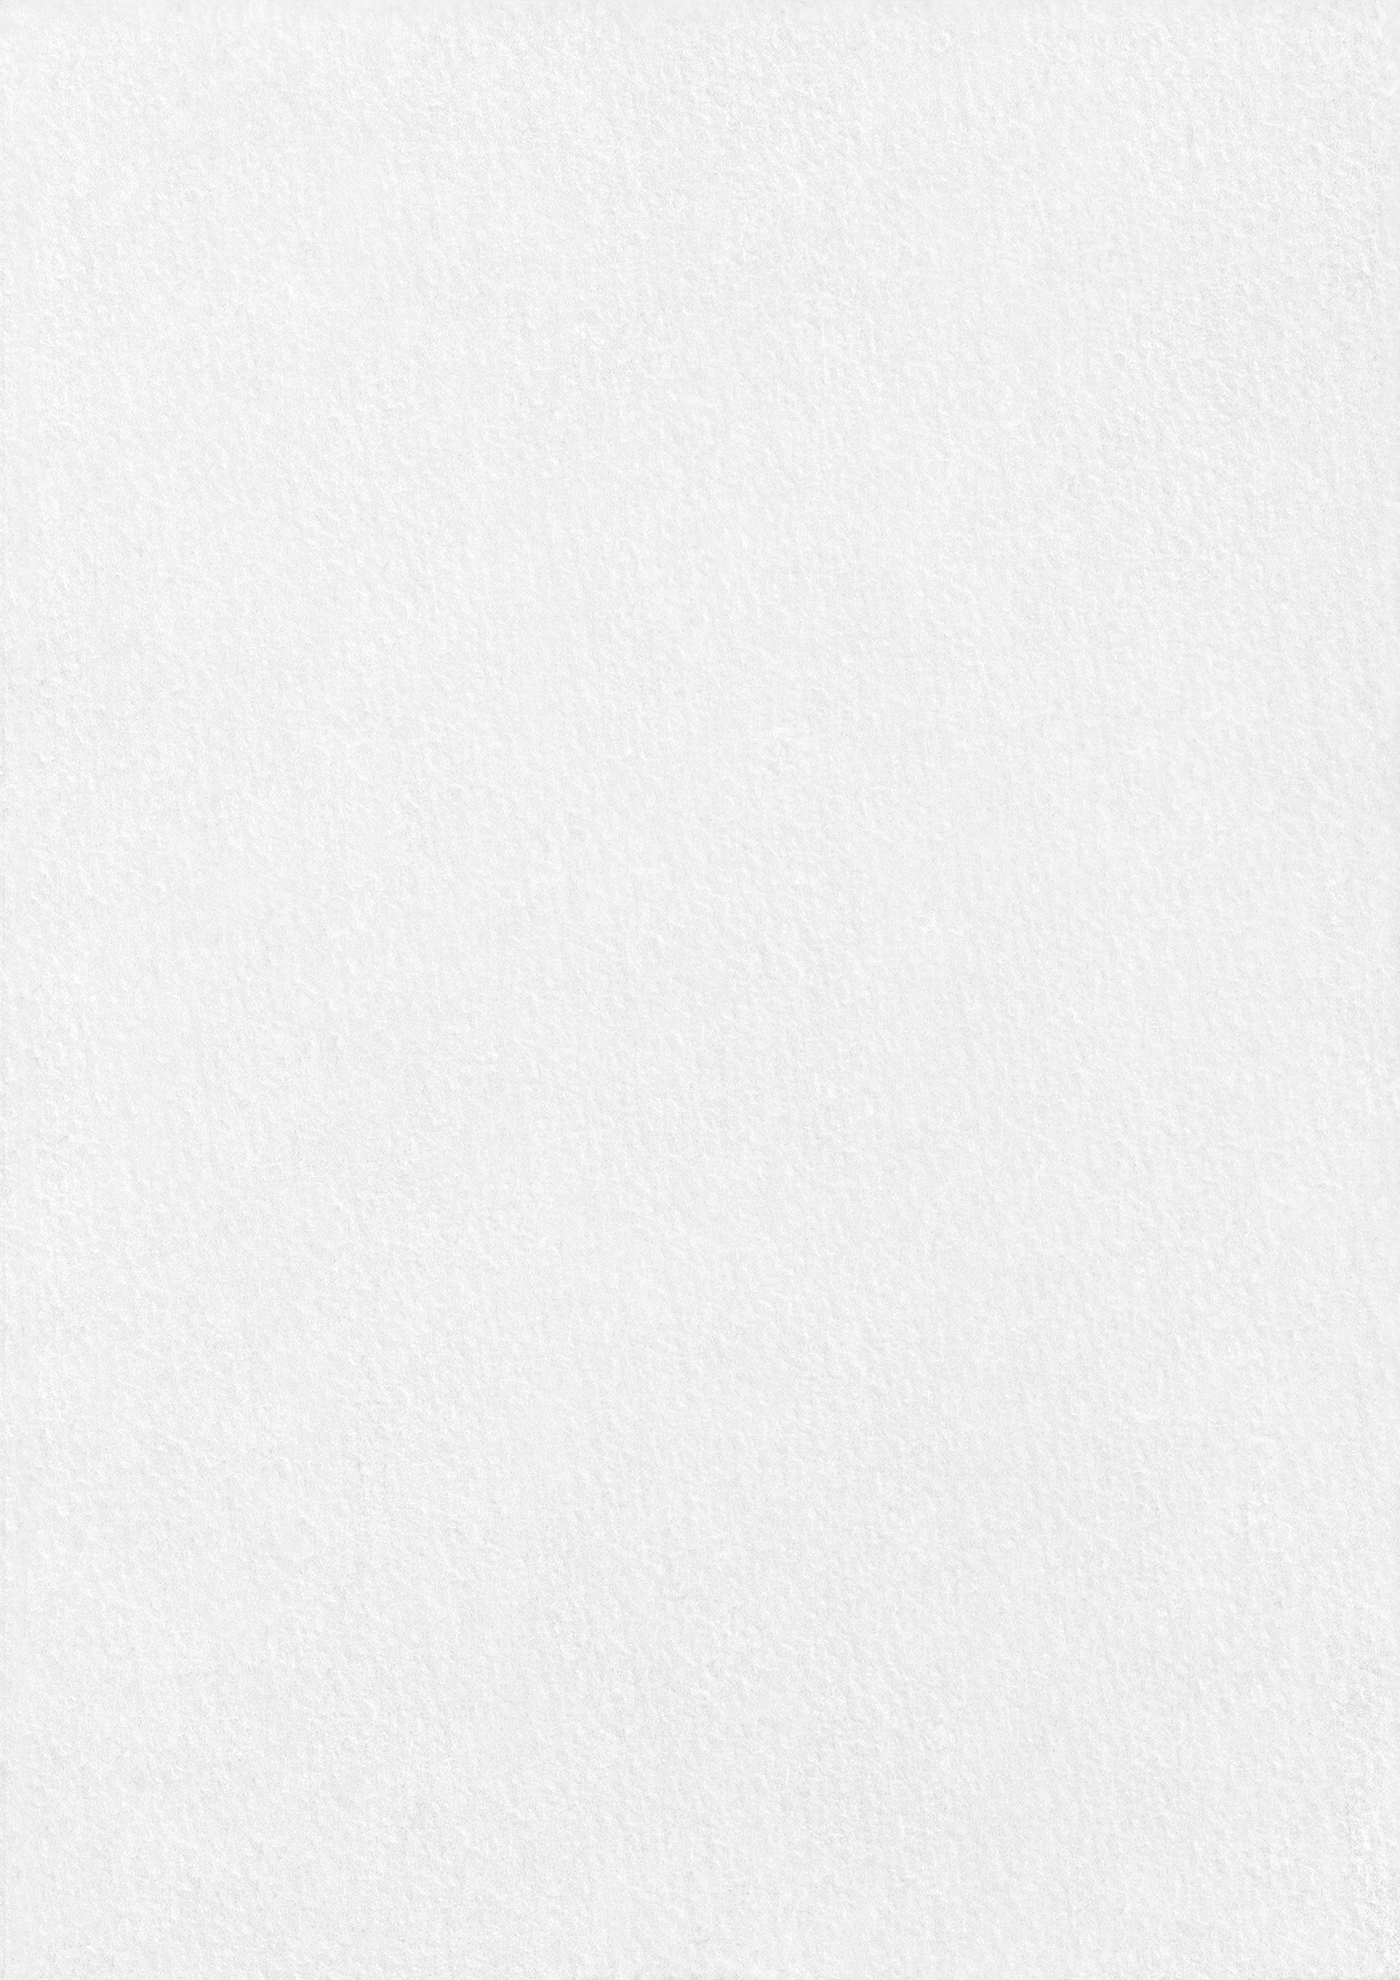 26 White Paper Background Textures Download Behance